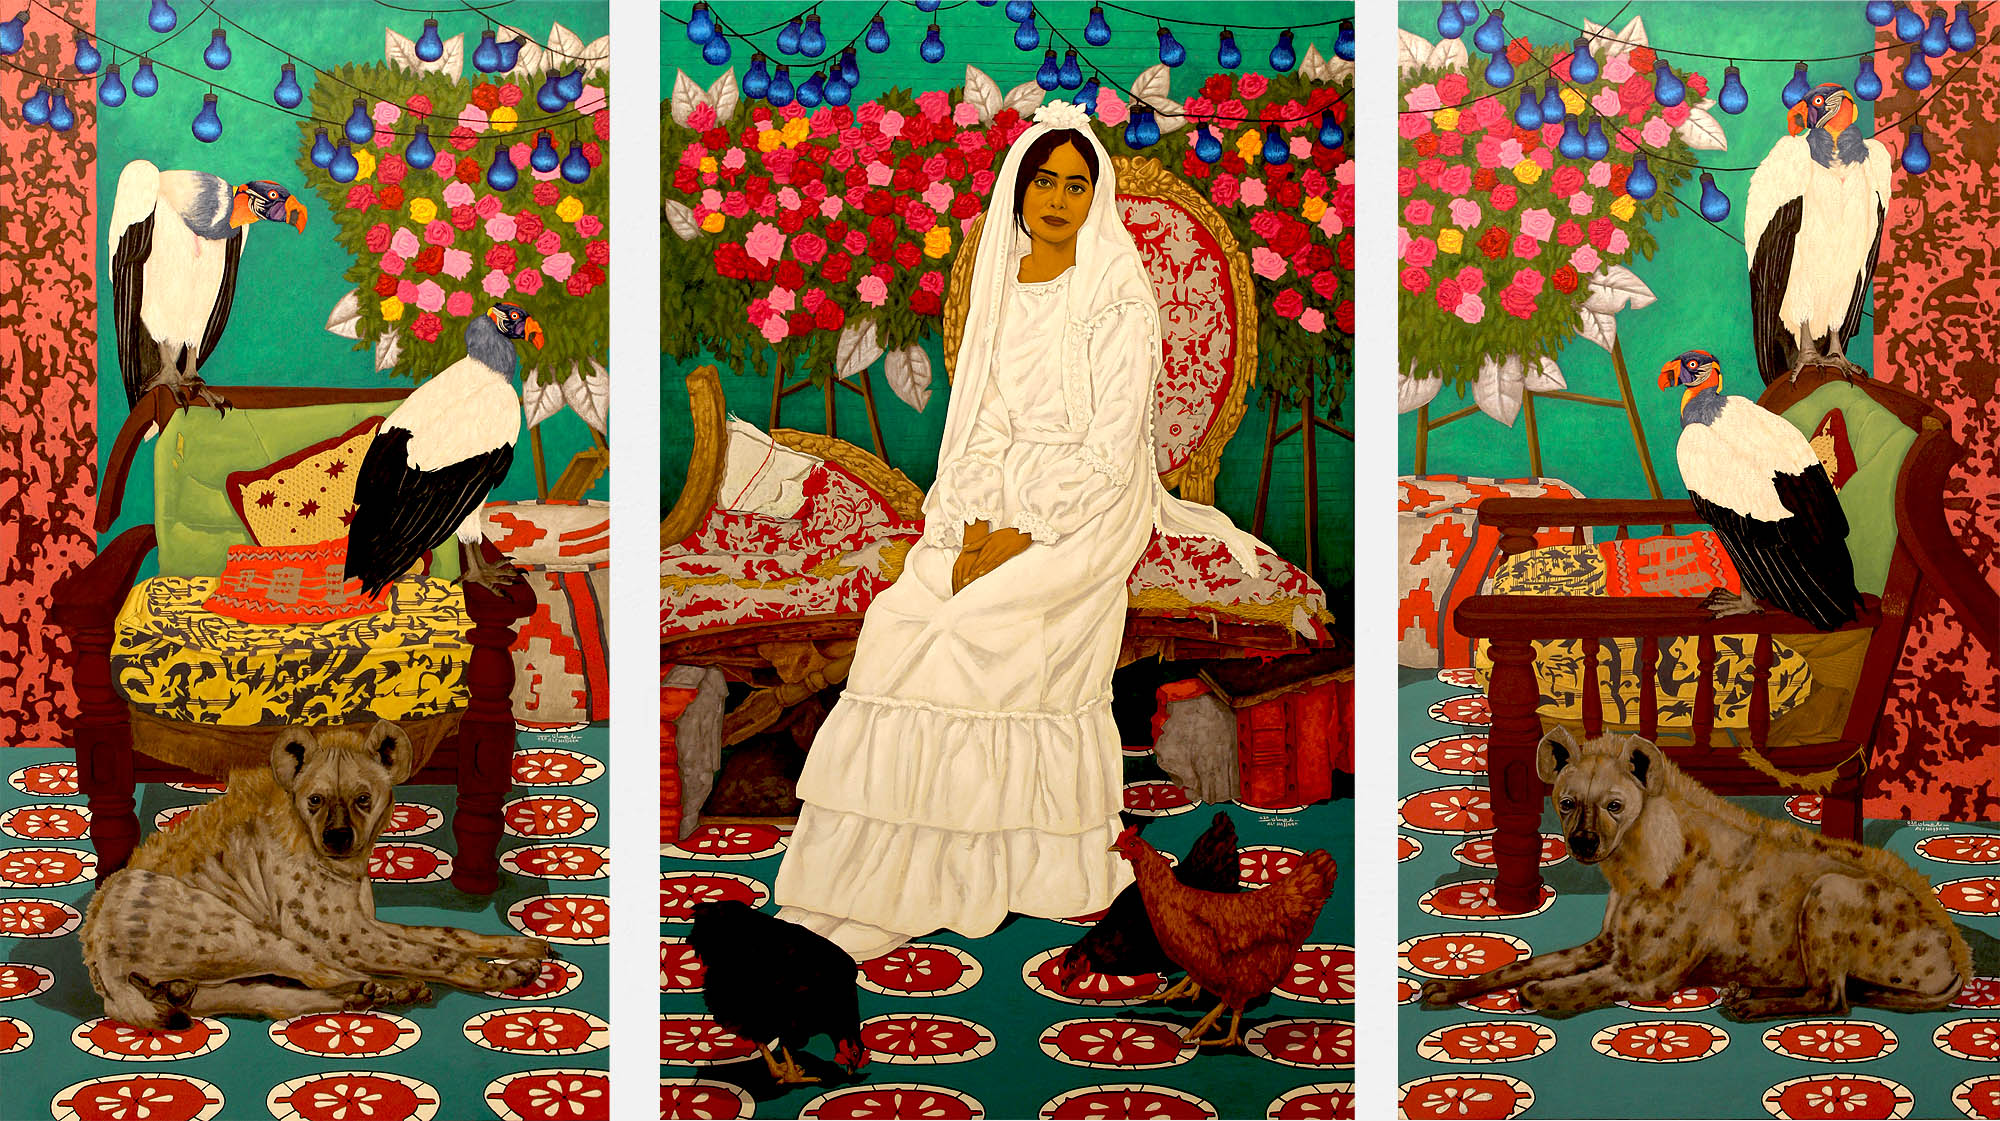 Temporary marriage (Triptych painting) exhibitions - Alexandria